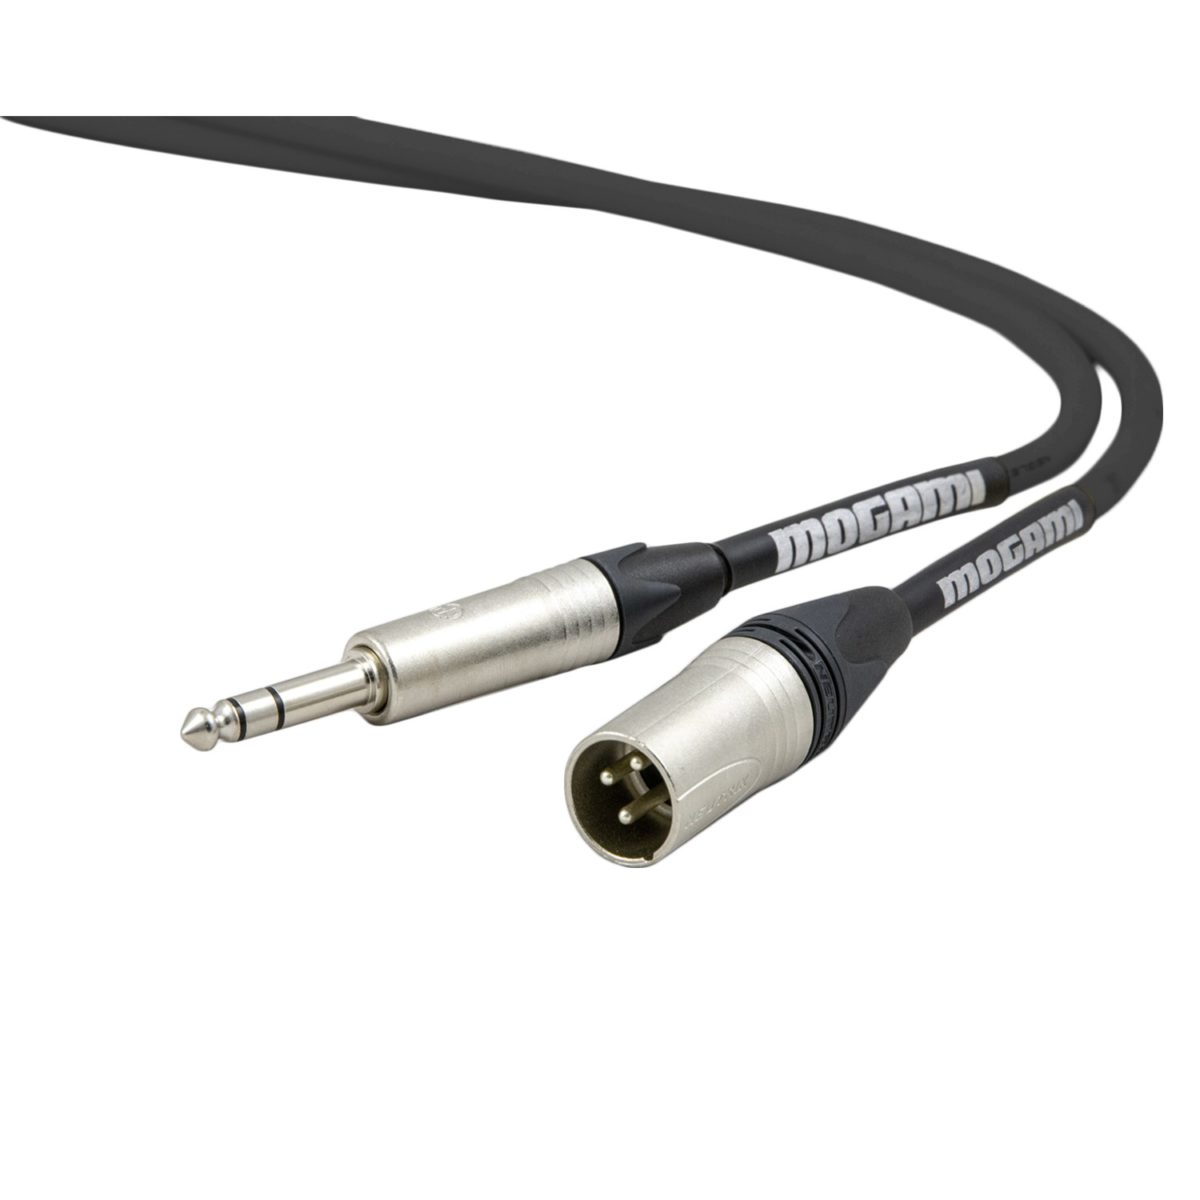 MOGAMI 2534 XM-TR Studio Accessory Cable uses the high-quality 2534